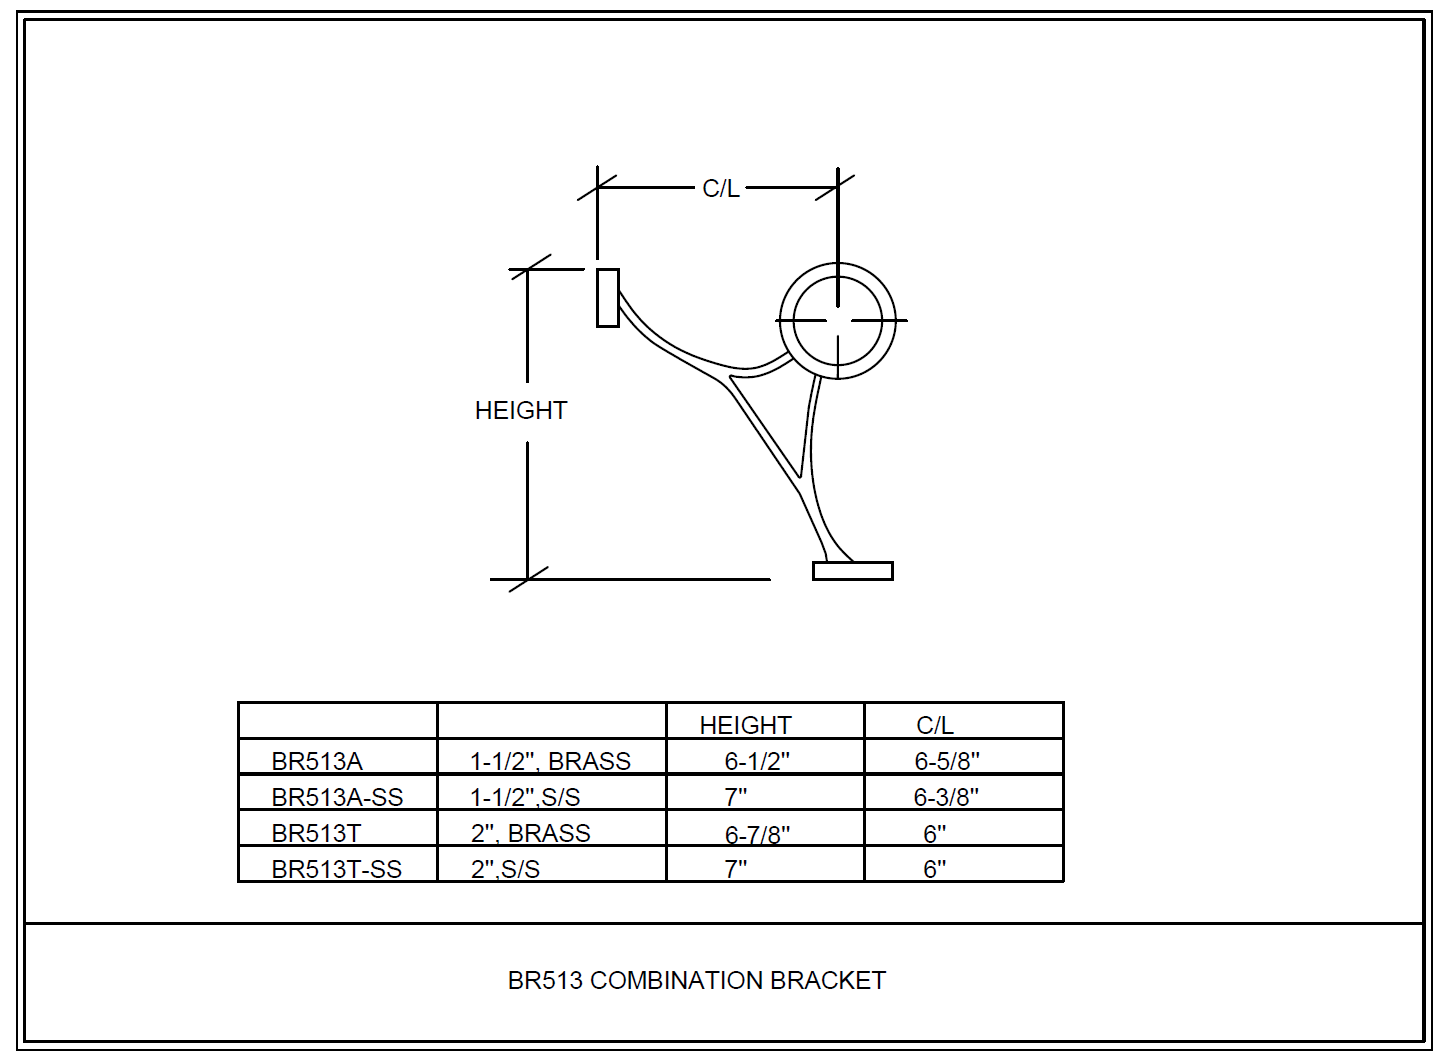 Foot Rail Combination Bracket 1.5" - All finishes